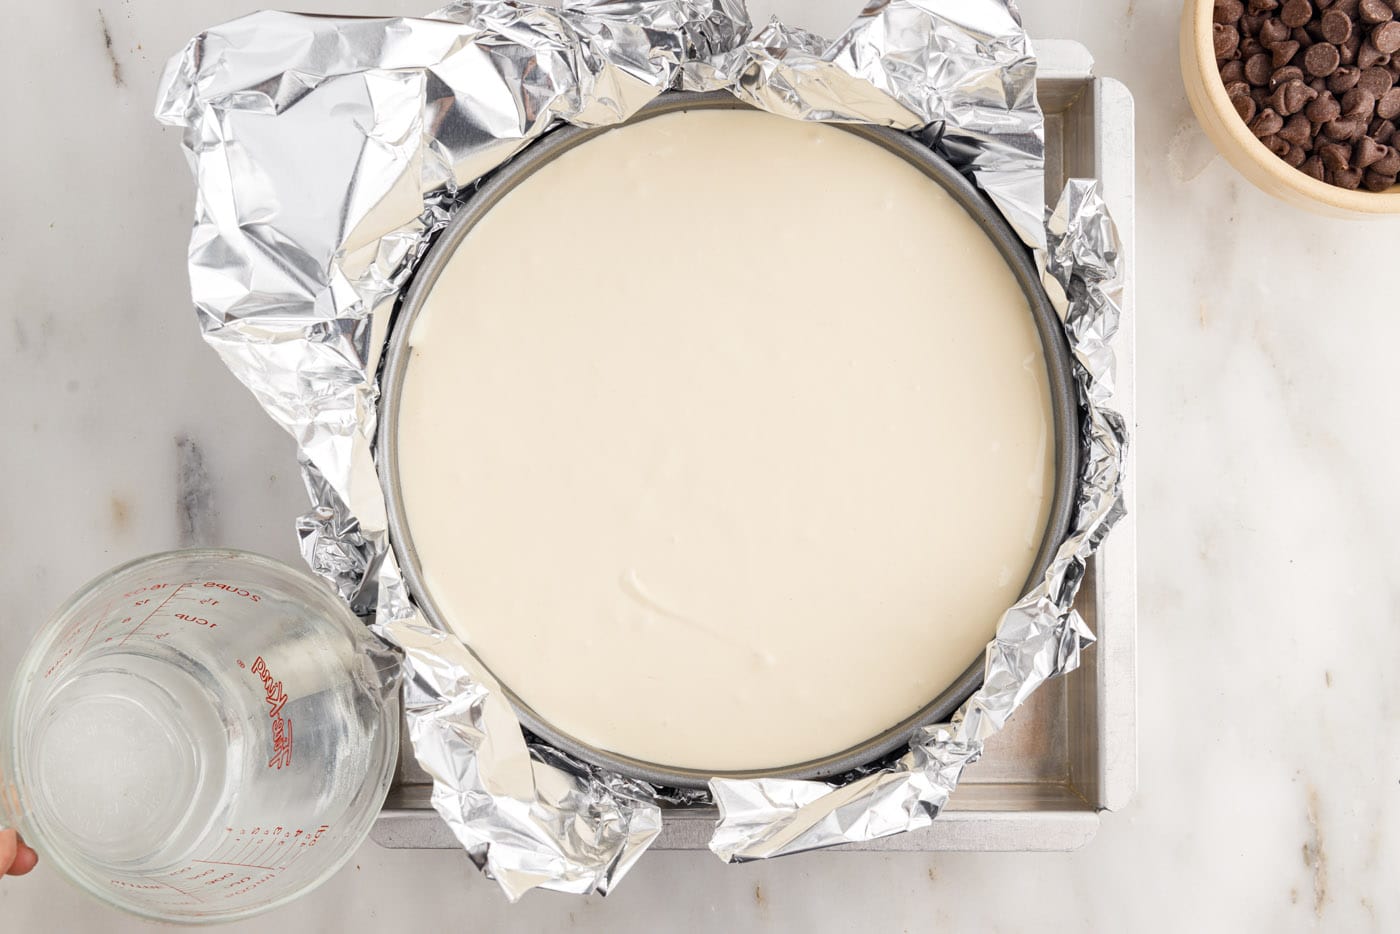 cheesecake wrapped in two layers of foil